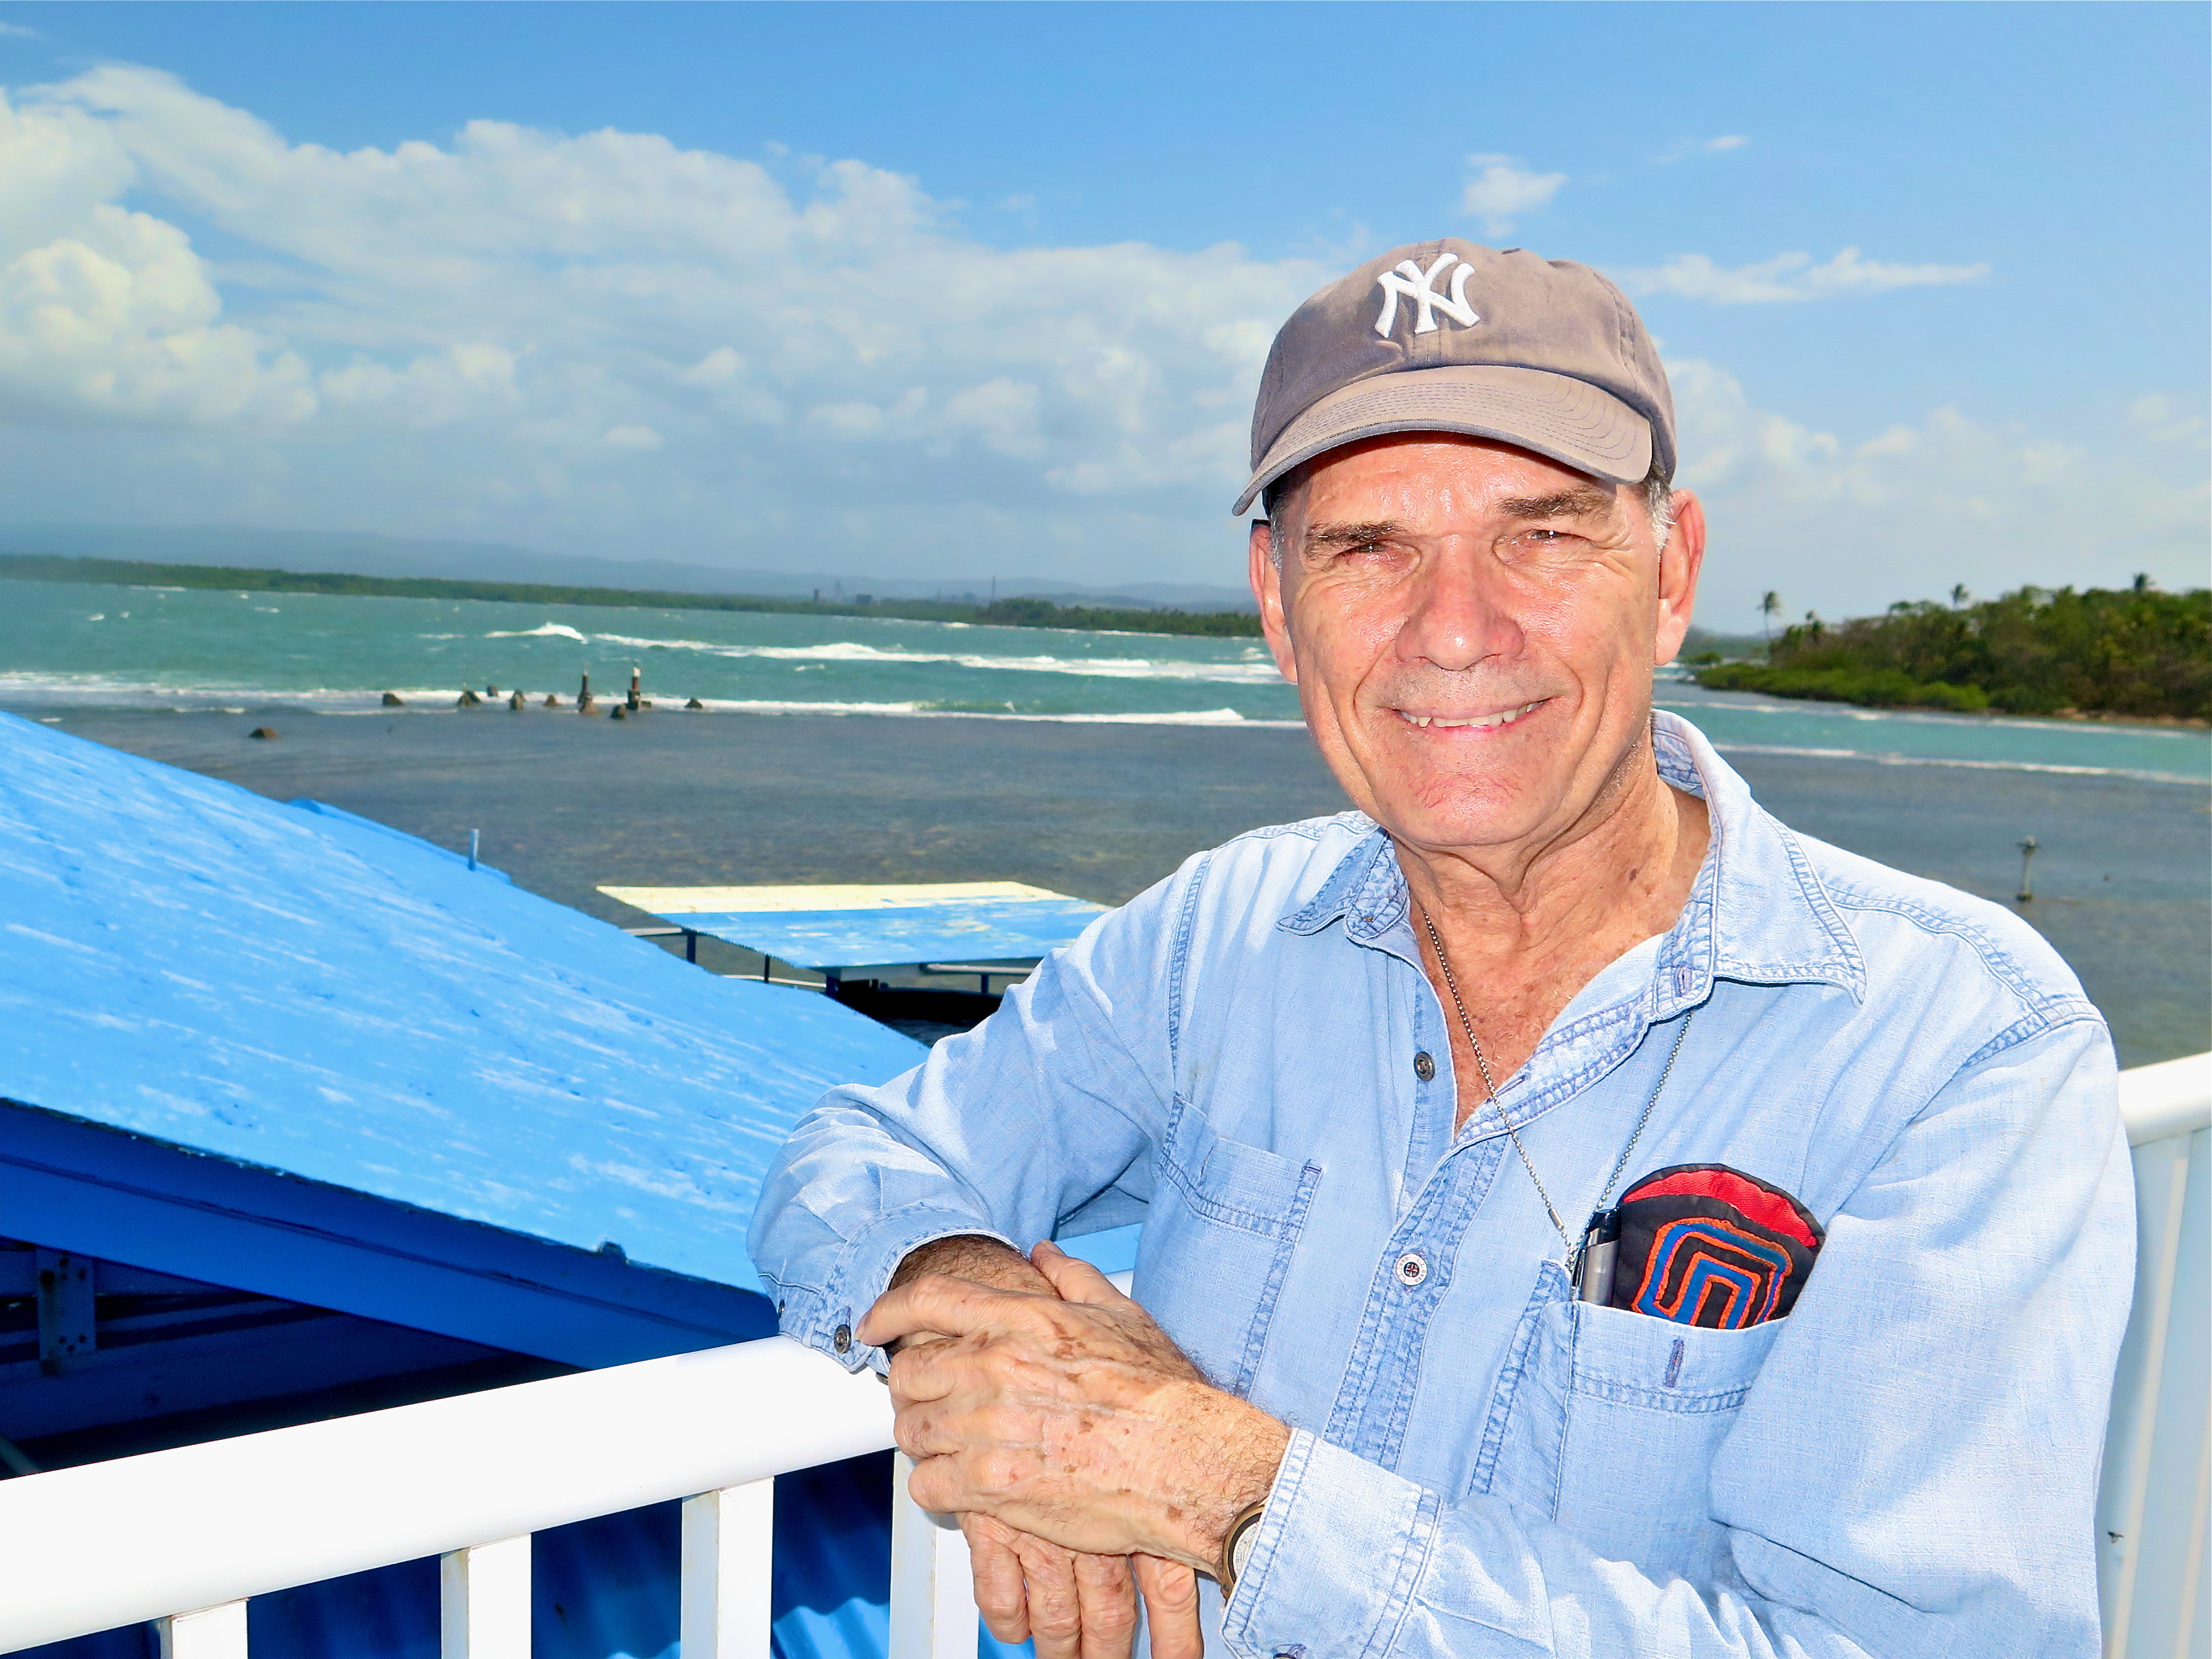 Stanley Heckadon-Moreno is Panama’s Great Conservationist and Patriot